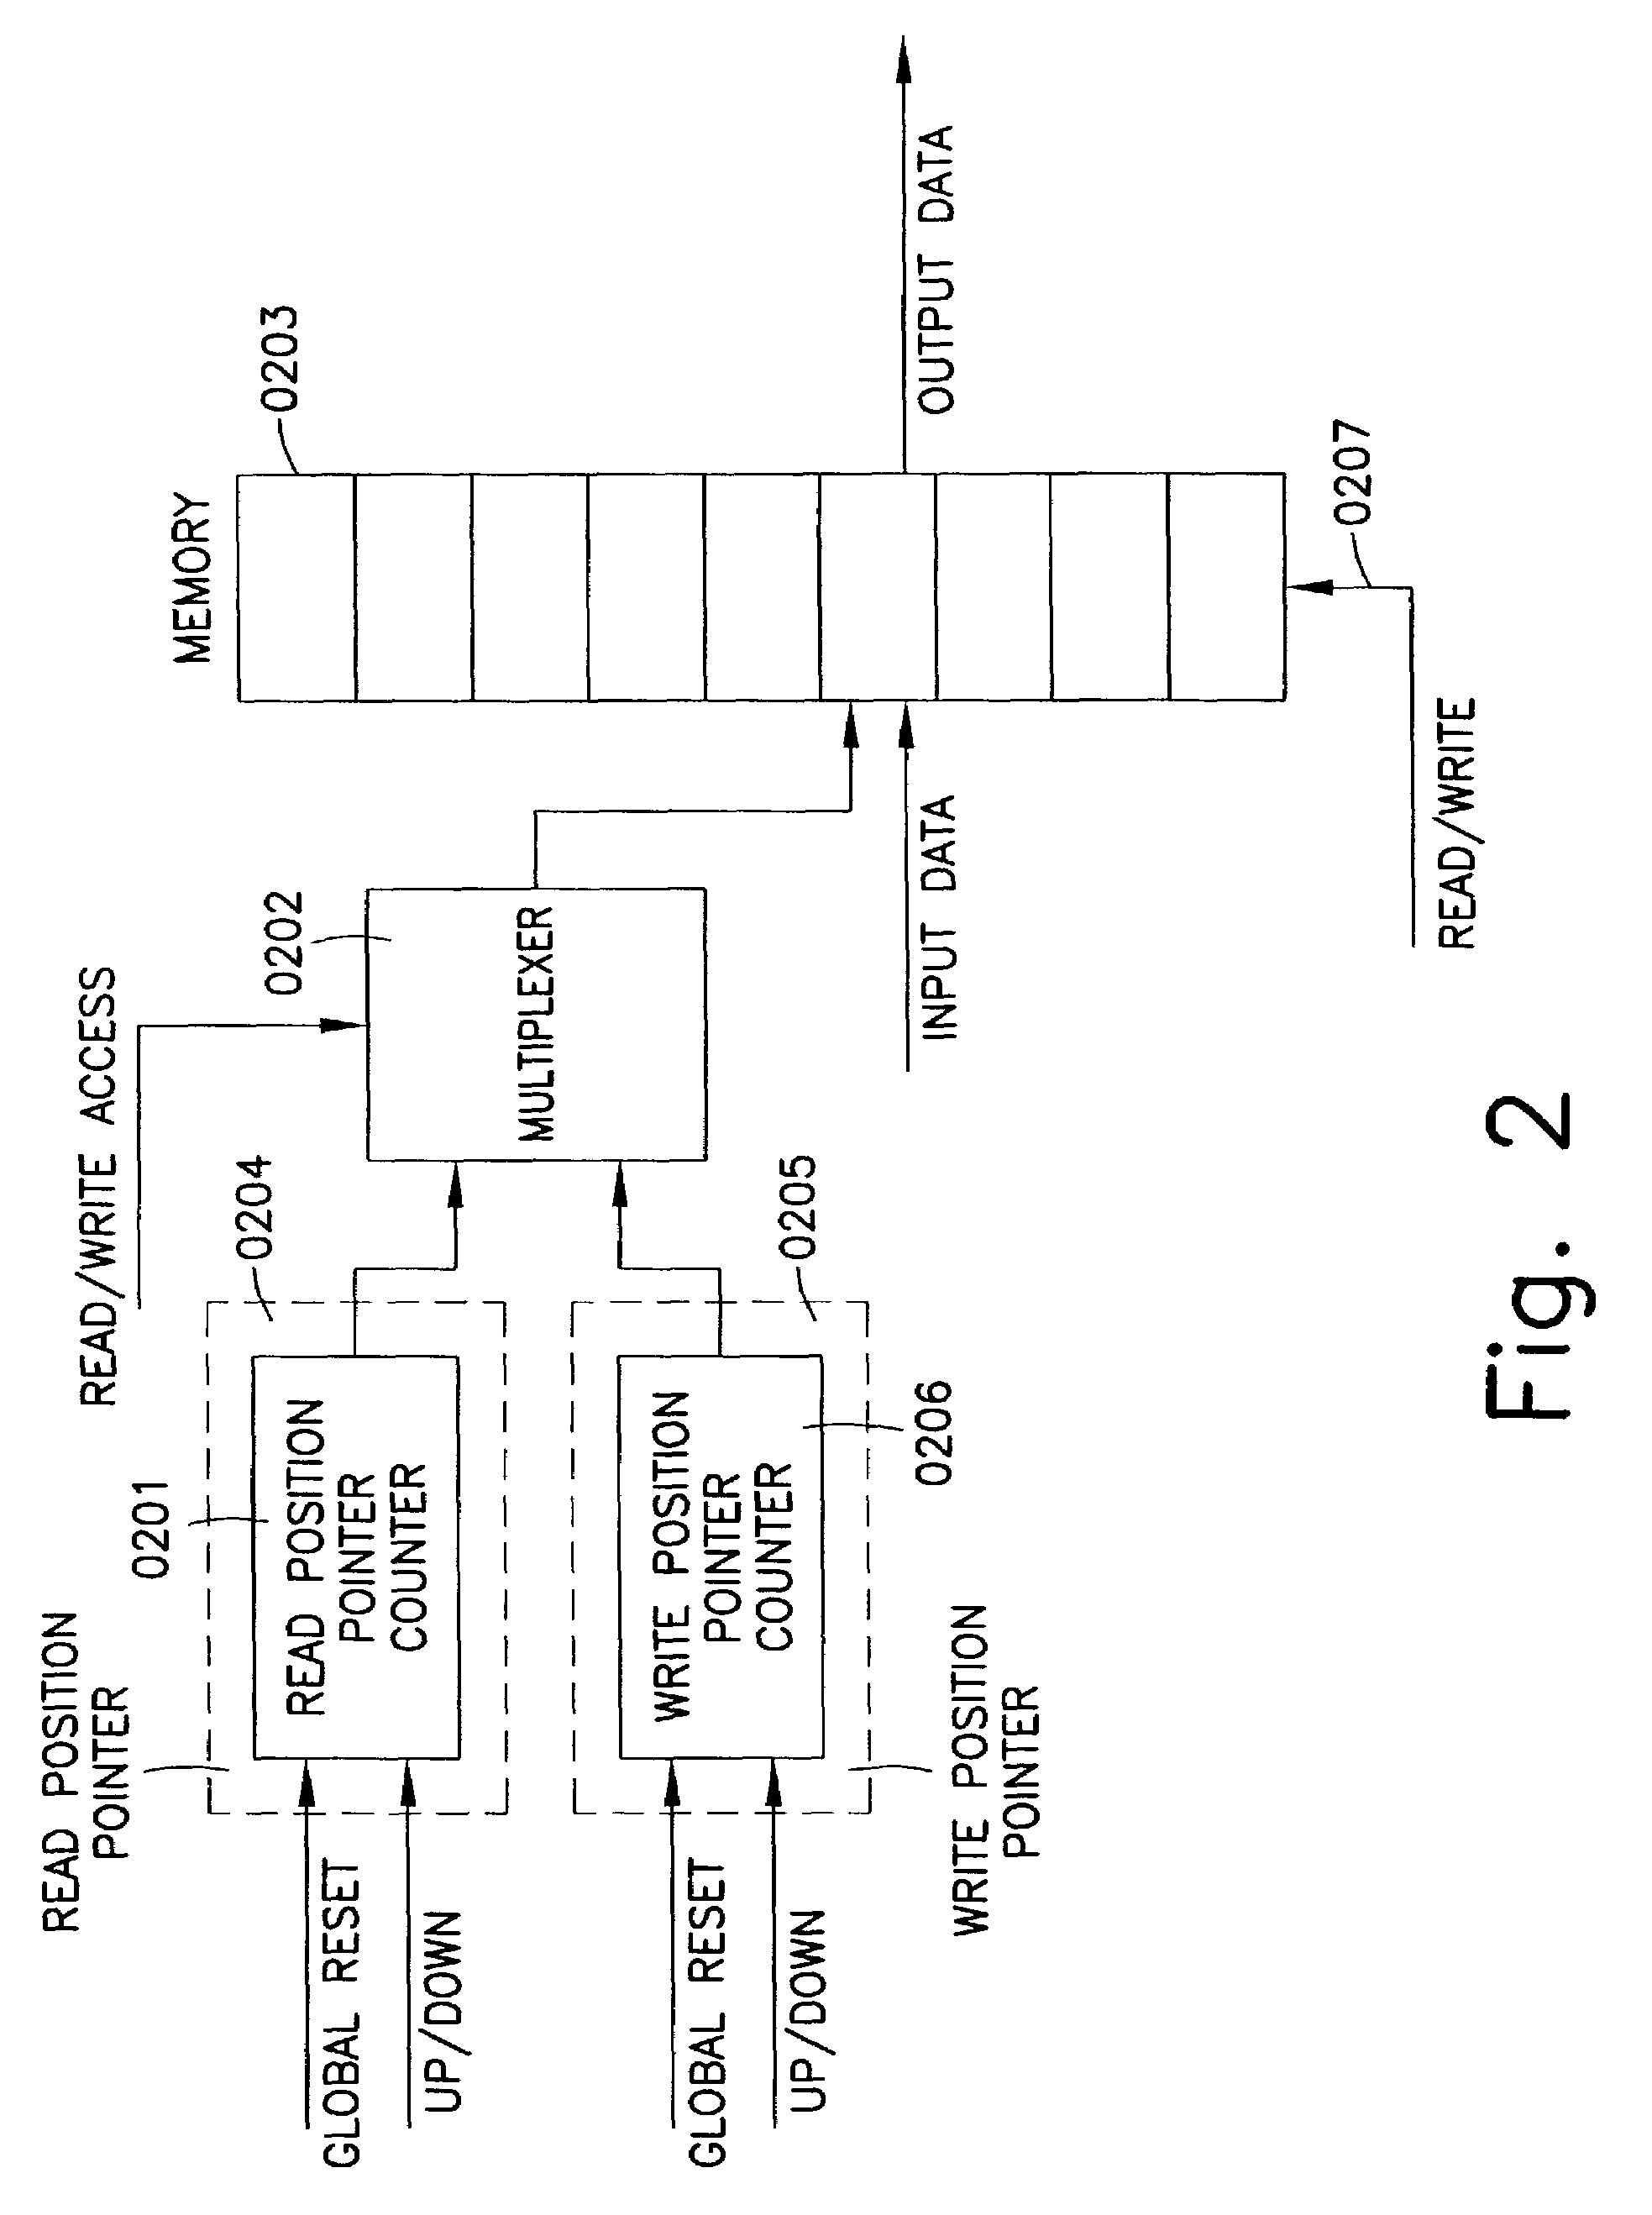 Process for automatic dynamic reloading of data flow processors (DFPS) and units with two- or three- dimensional programmable cell architectures (FPGAS, DPGAS, and the like)